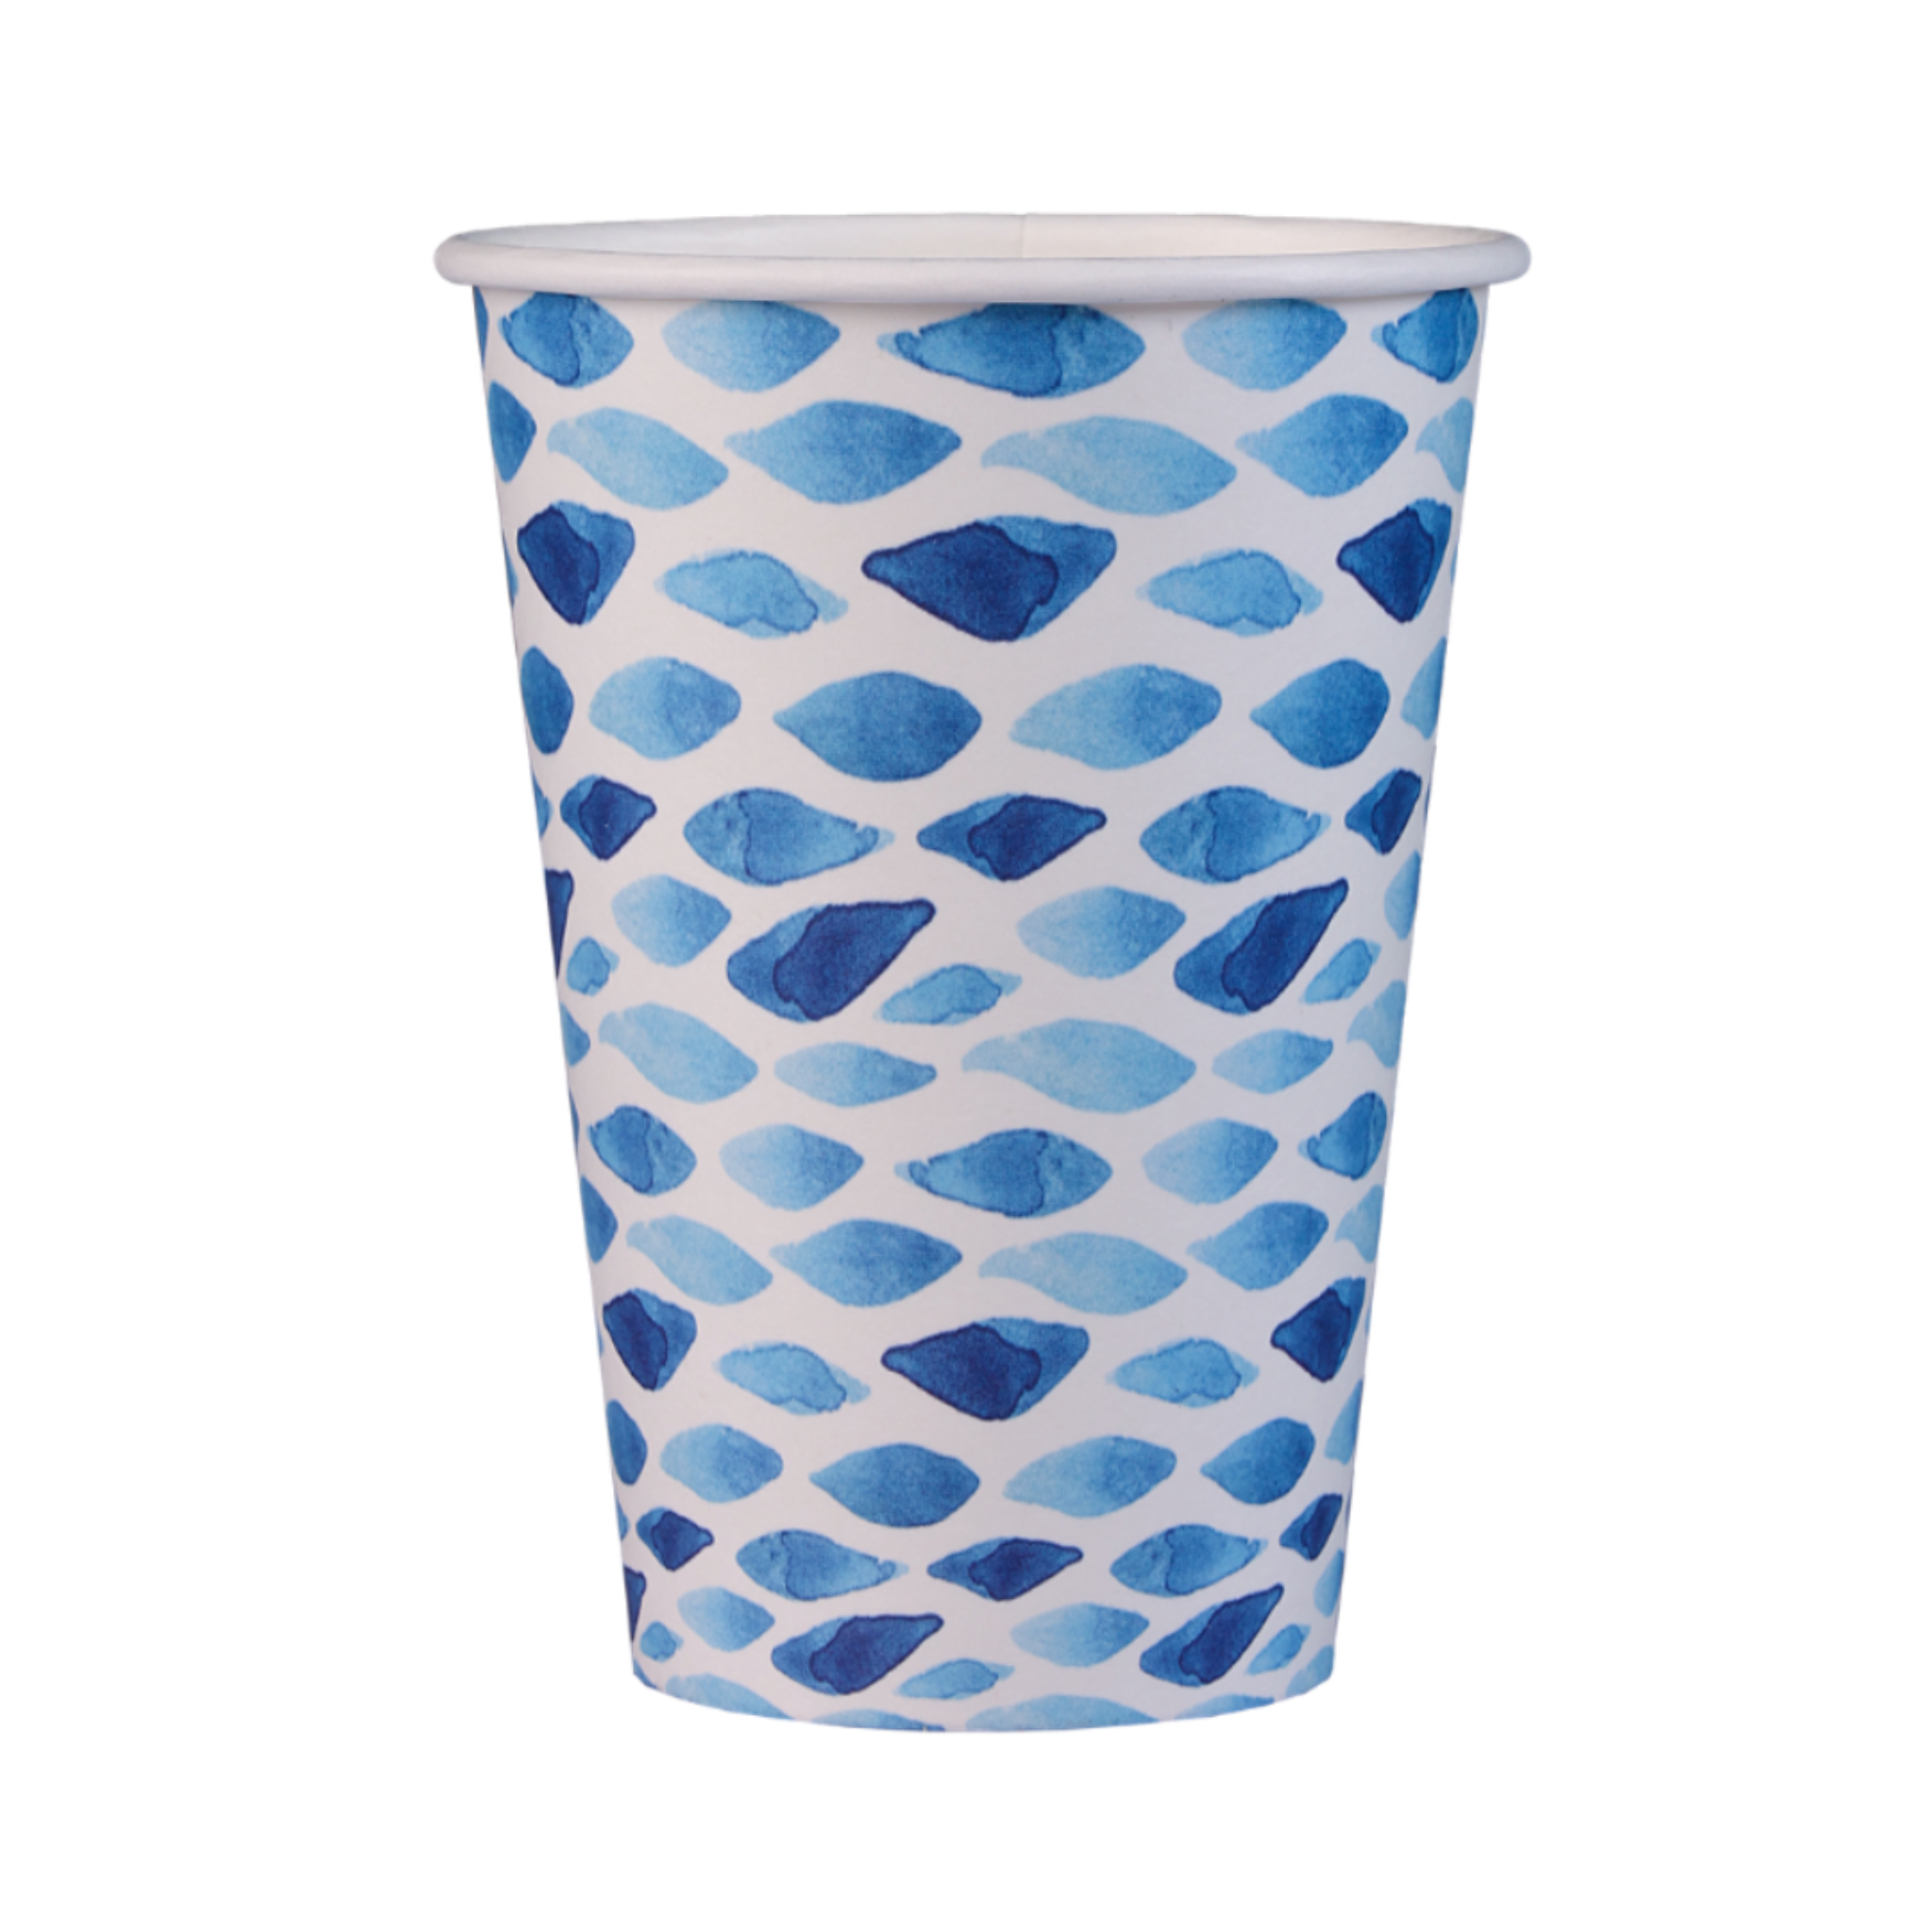 200ml plastic-free paper cups with fish and starfish prints